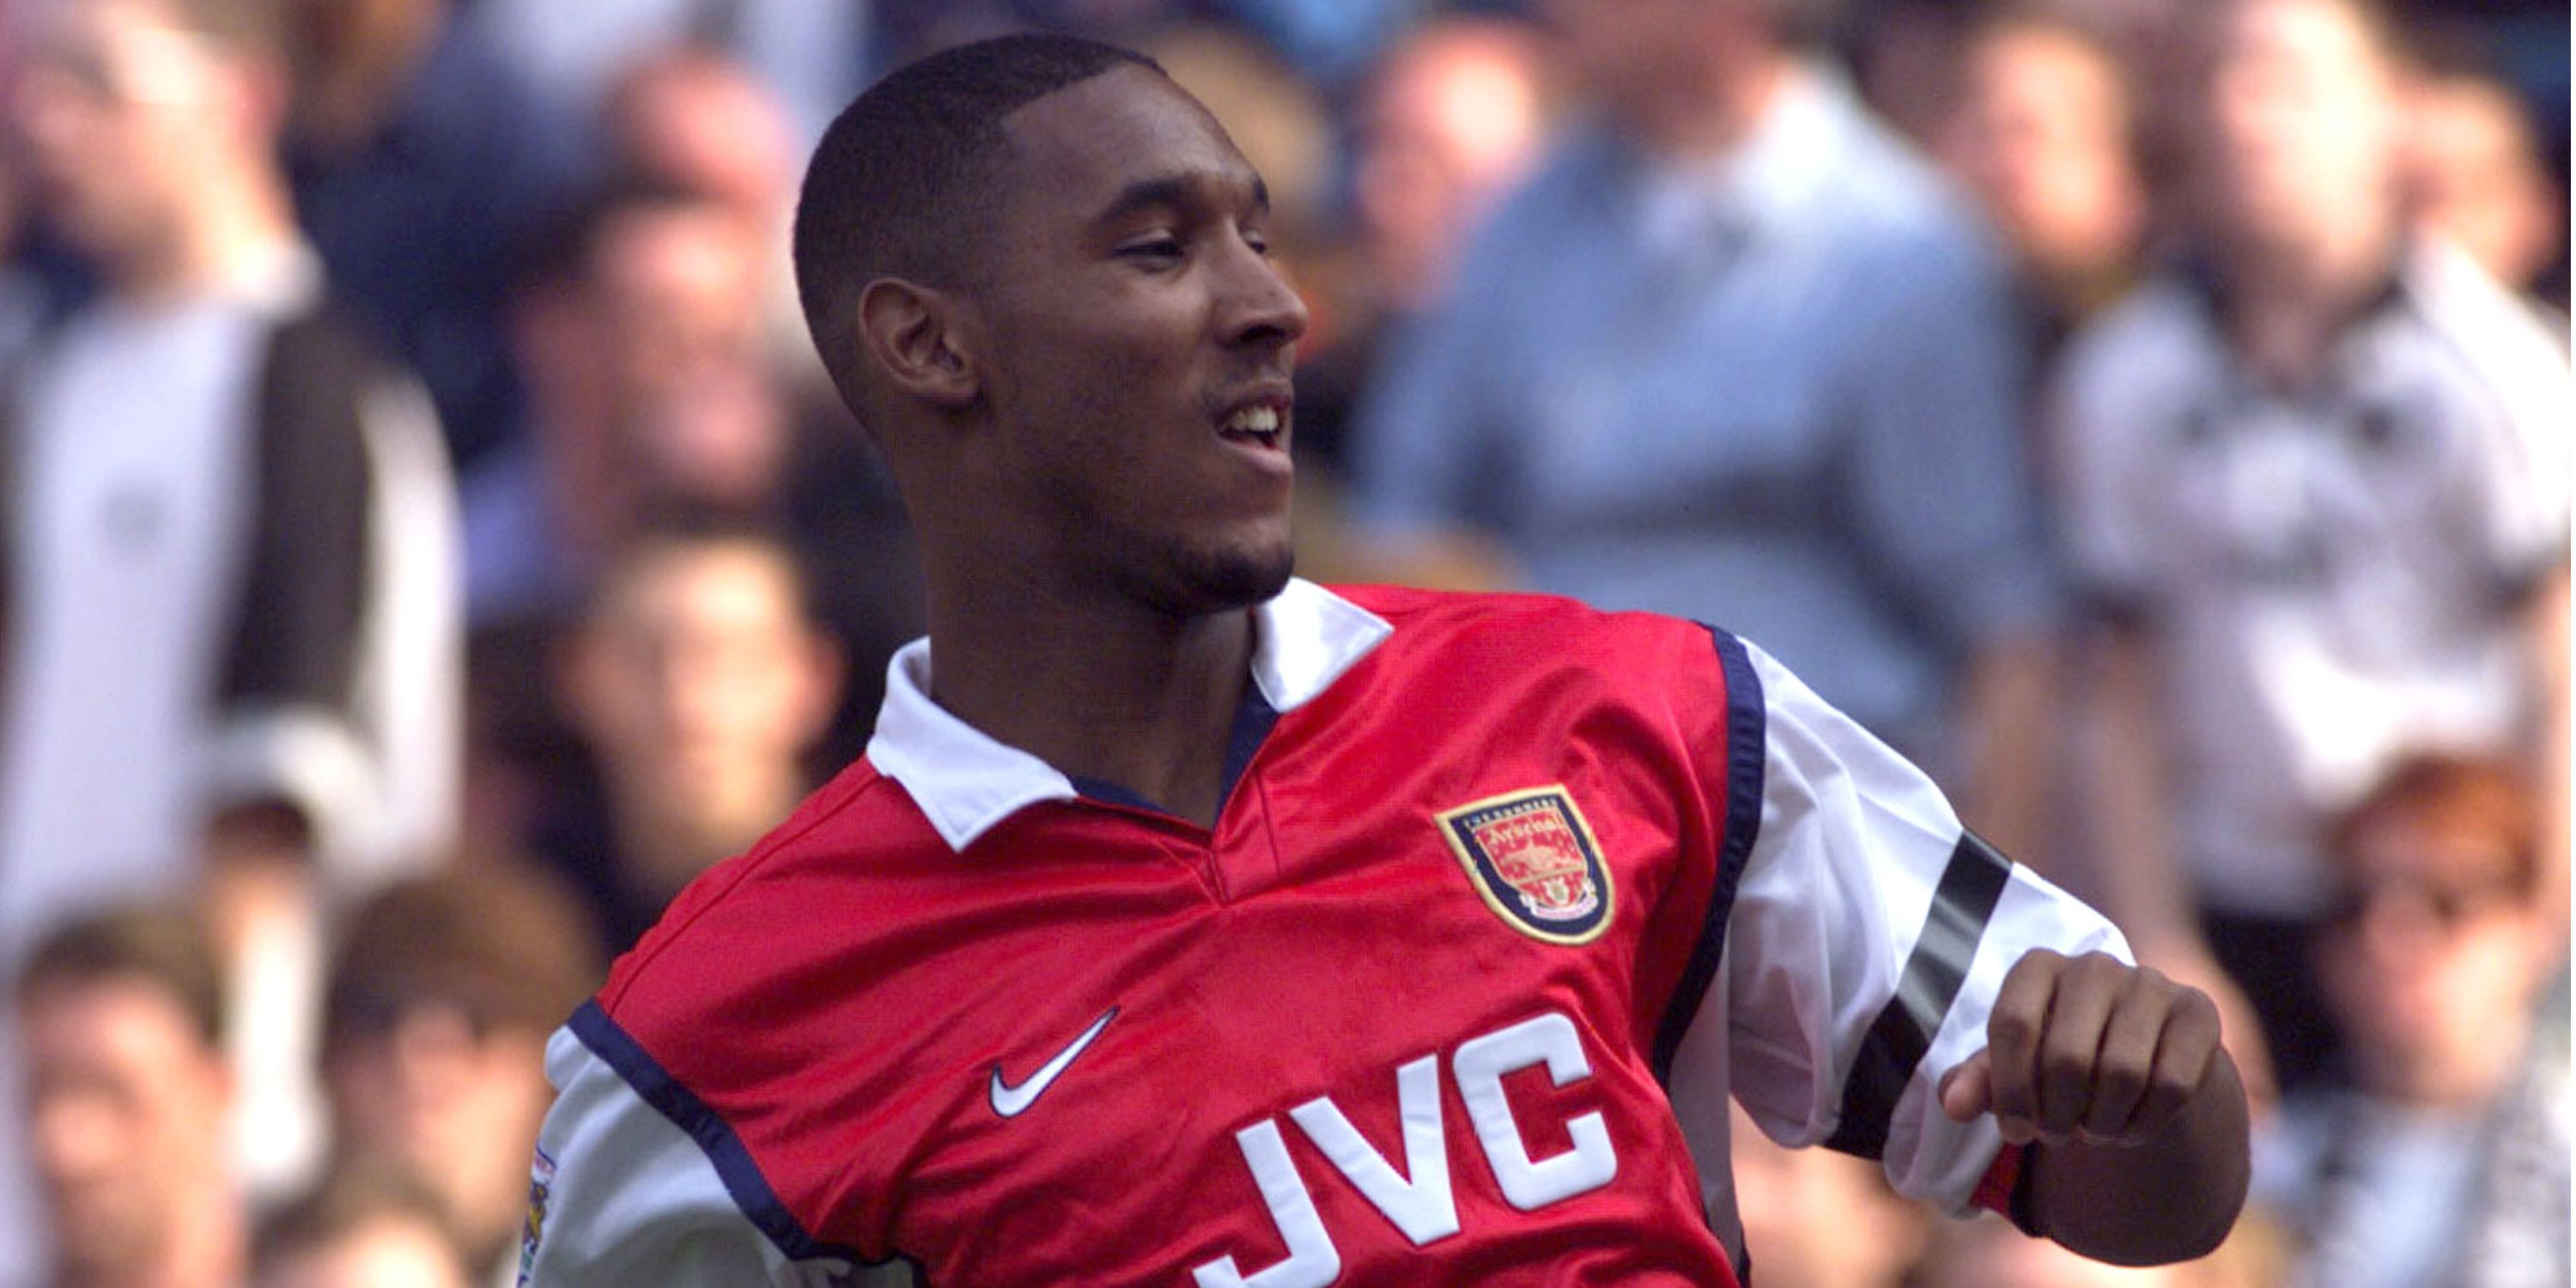 Nicolas Anelka in action for Arsenal in the Premier League